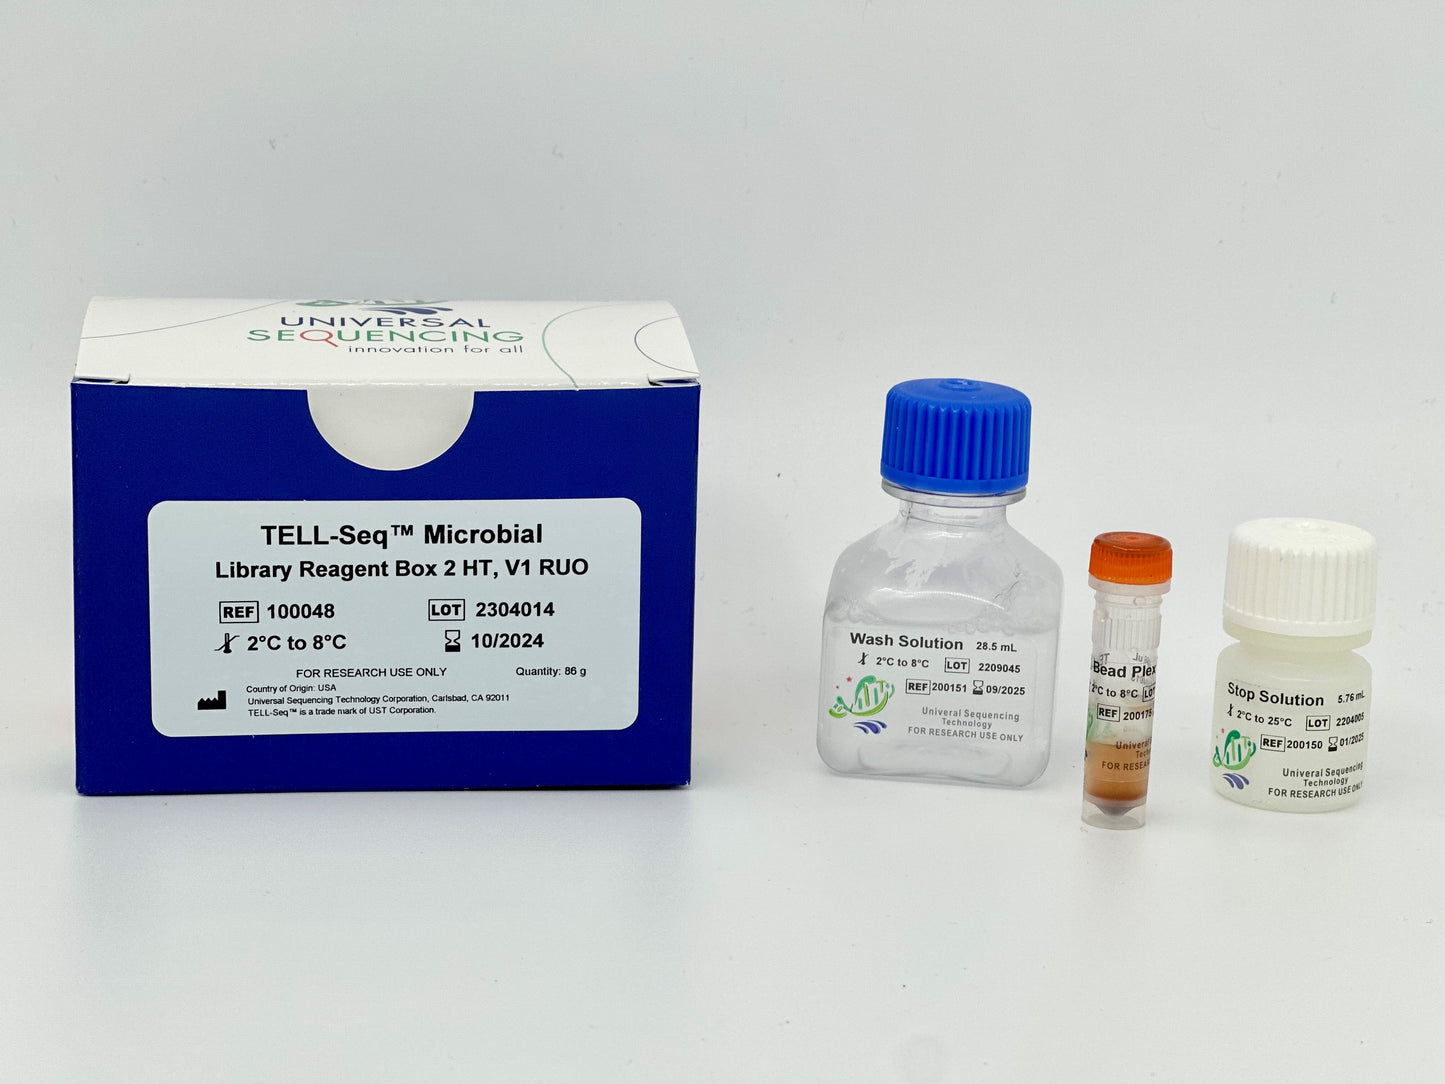 TELL-Seq™ Microbial Library Reagent Box 2 HT V1, RUO